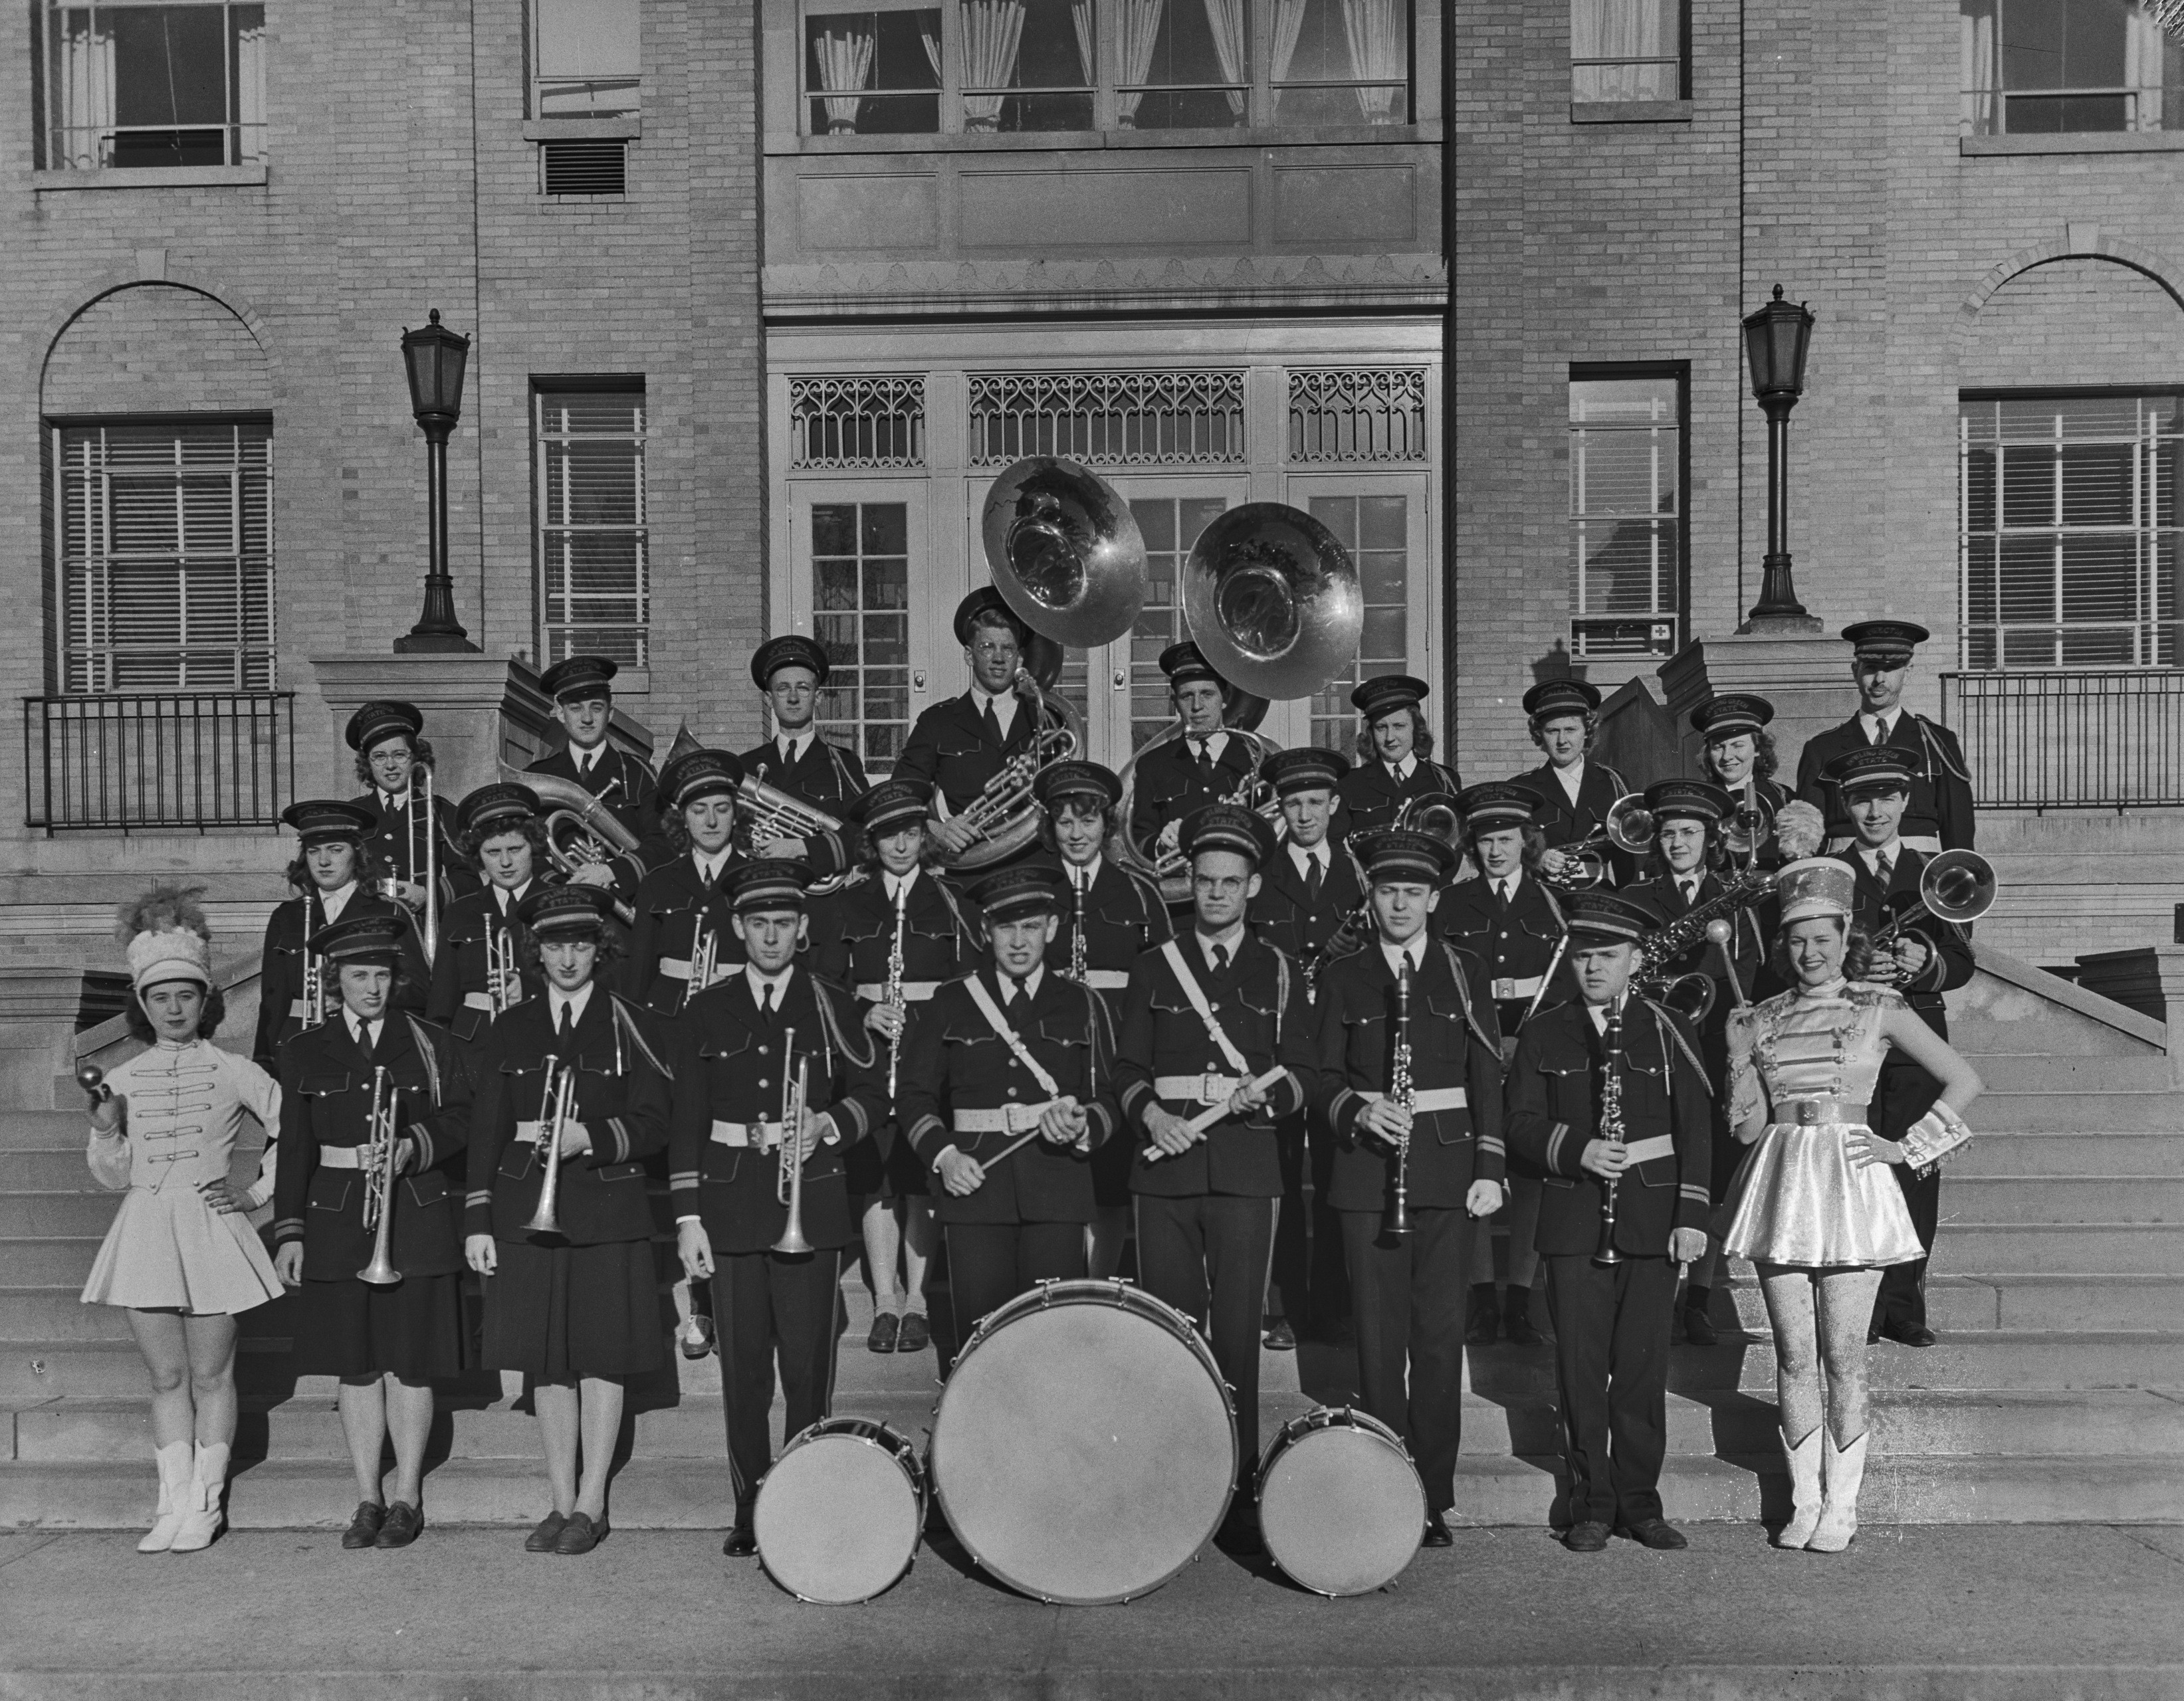 Historic photo shows the BGSU marching band posing in rows on the steps of University Hall in 1942. 